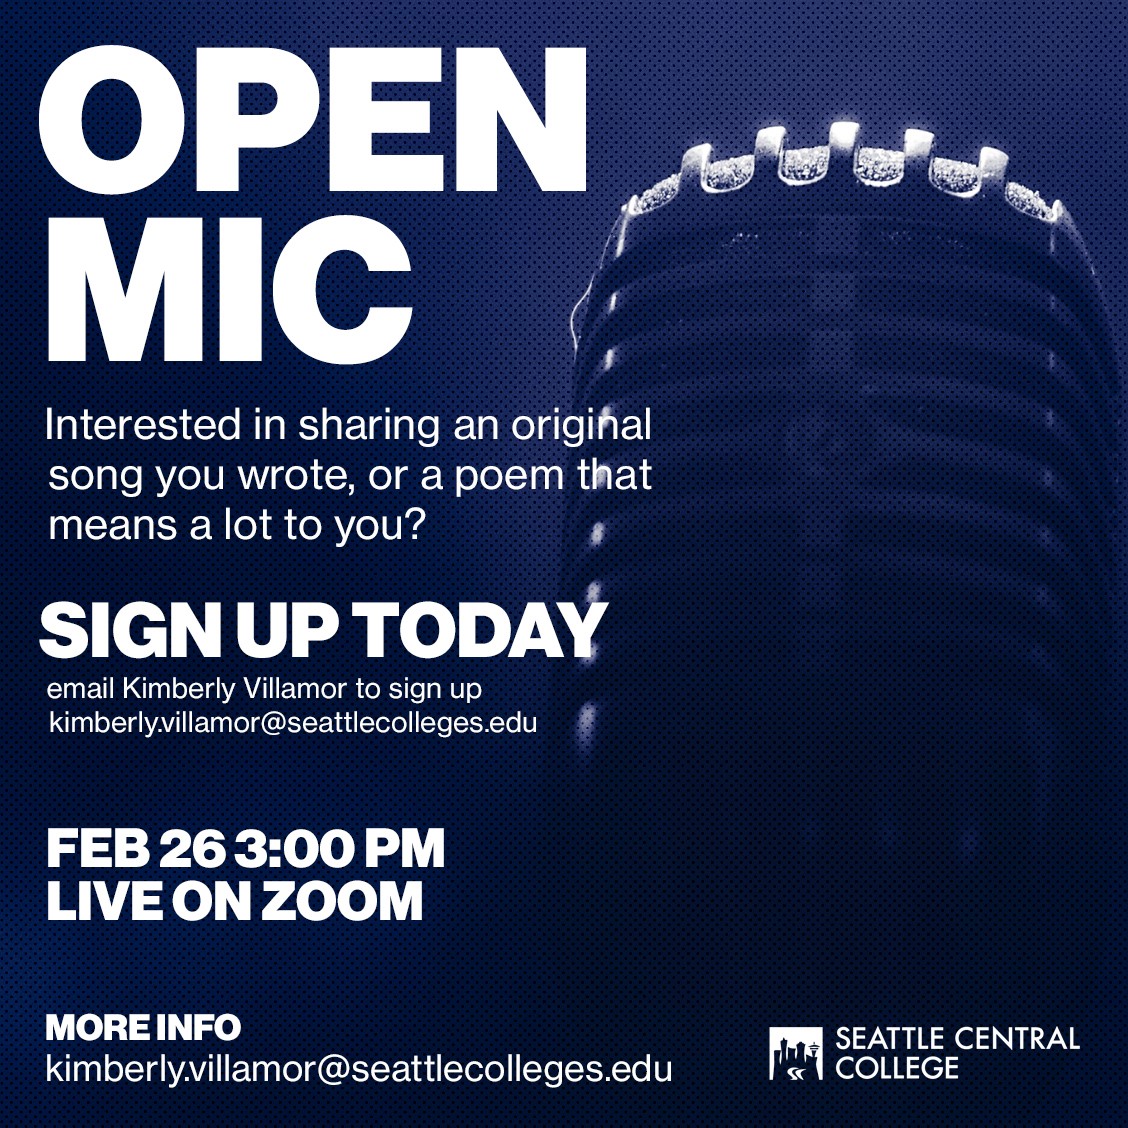 Open Mic. Interested in sharing an original song you wrote, or a poem that means a lot to you? Sign-up today. Email Kimberly at kimberly.villamor@seattlecolleges.edu to sign up. Event is on February 26, 3PM, live on zoom.